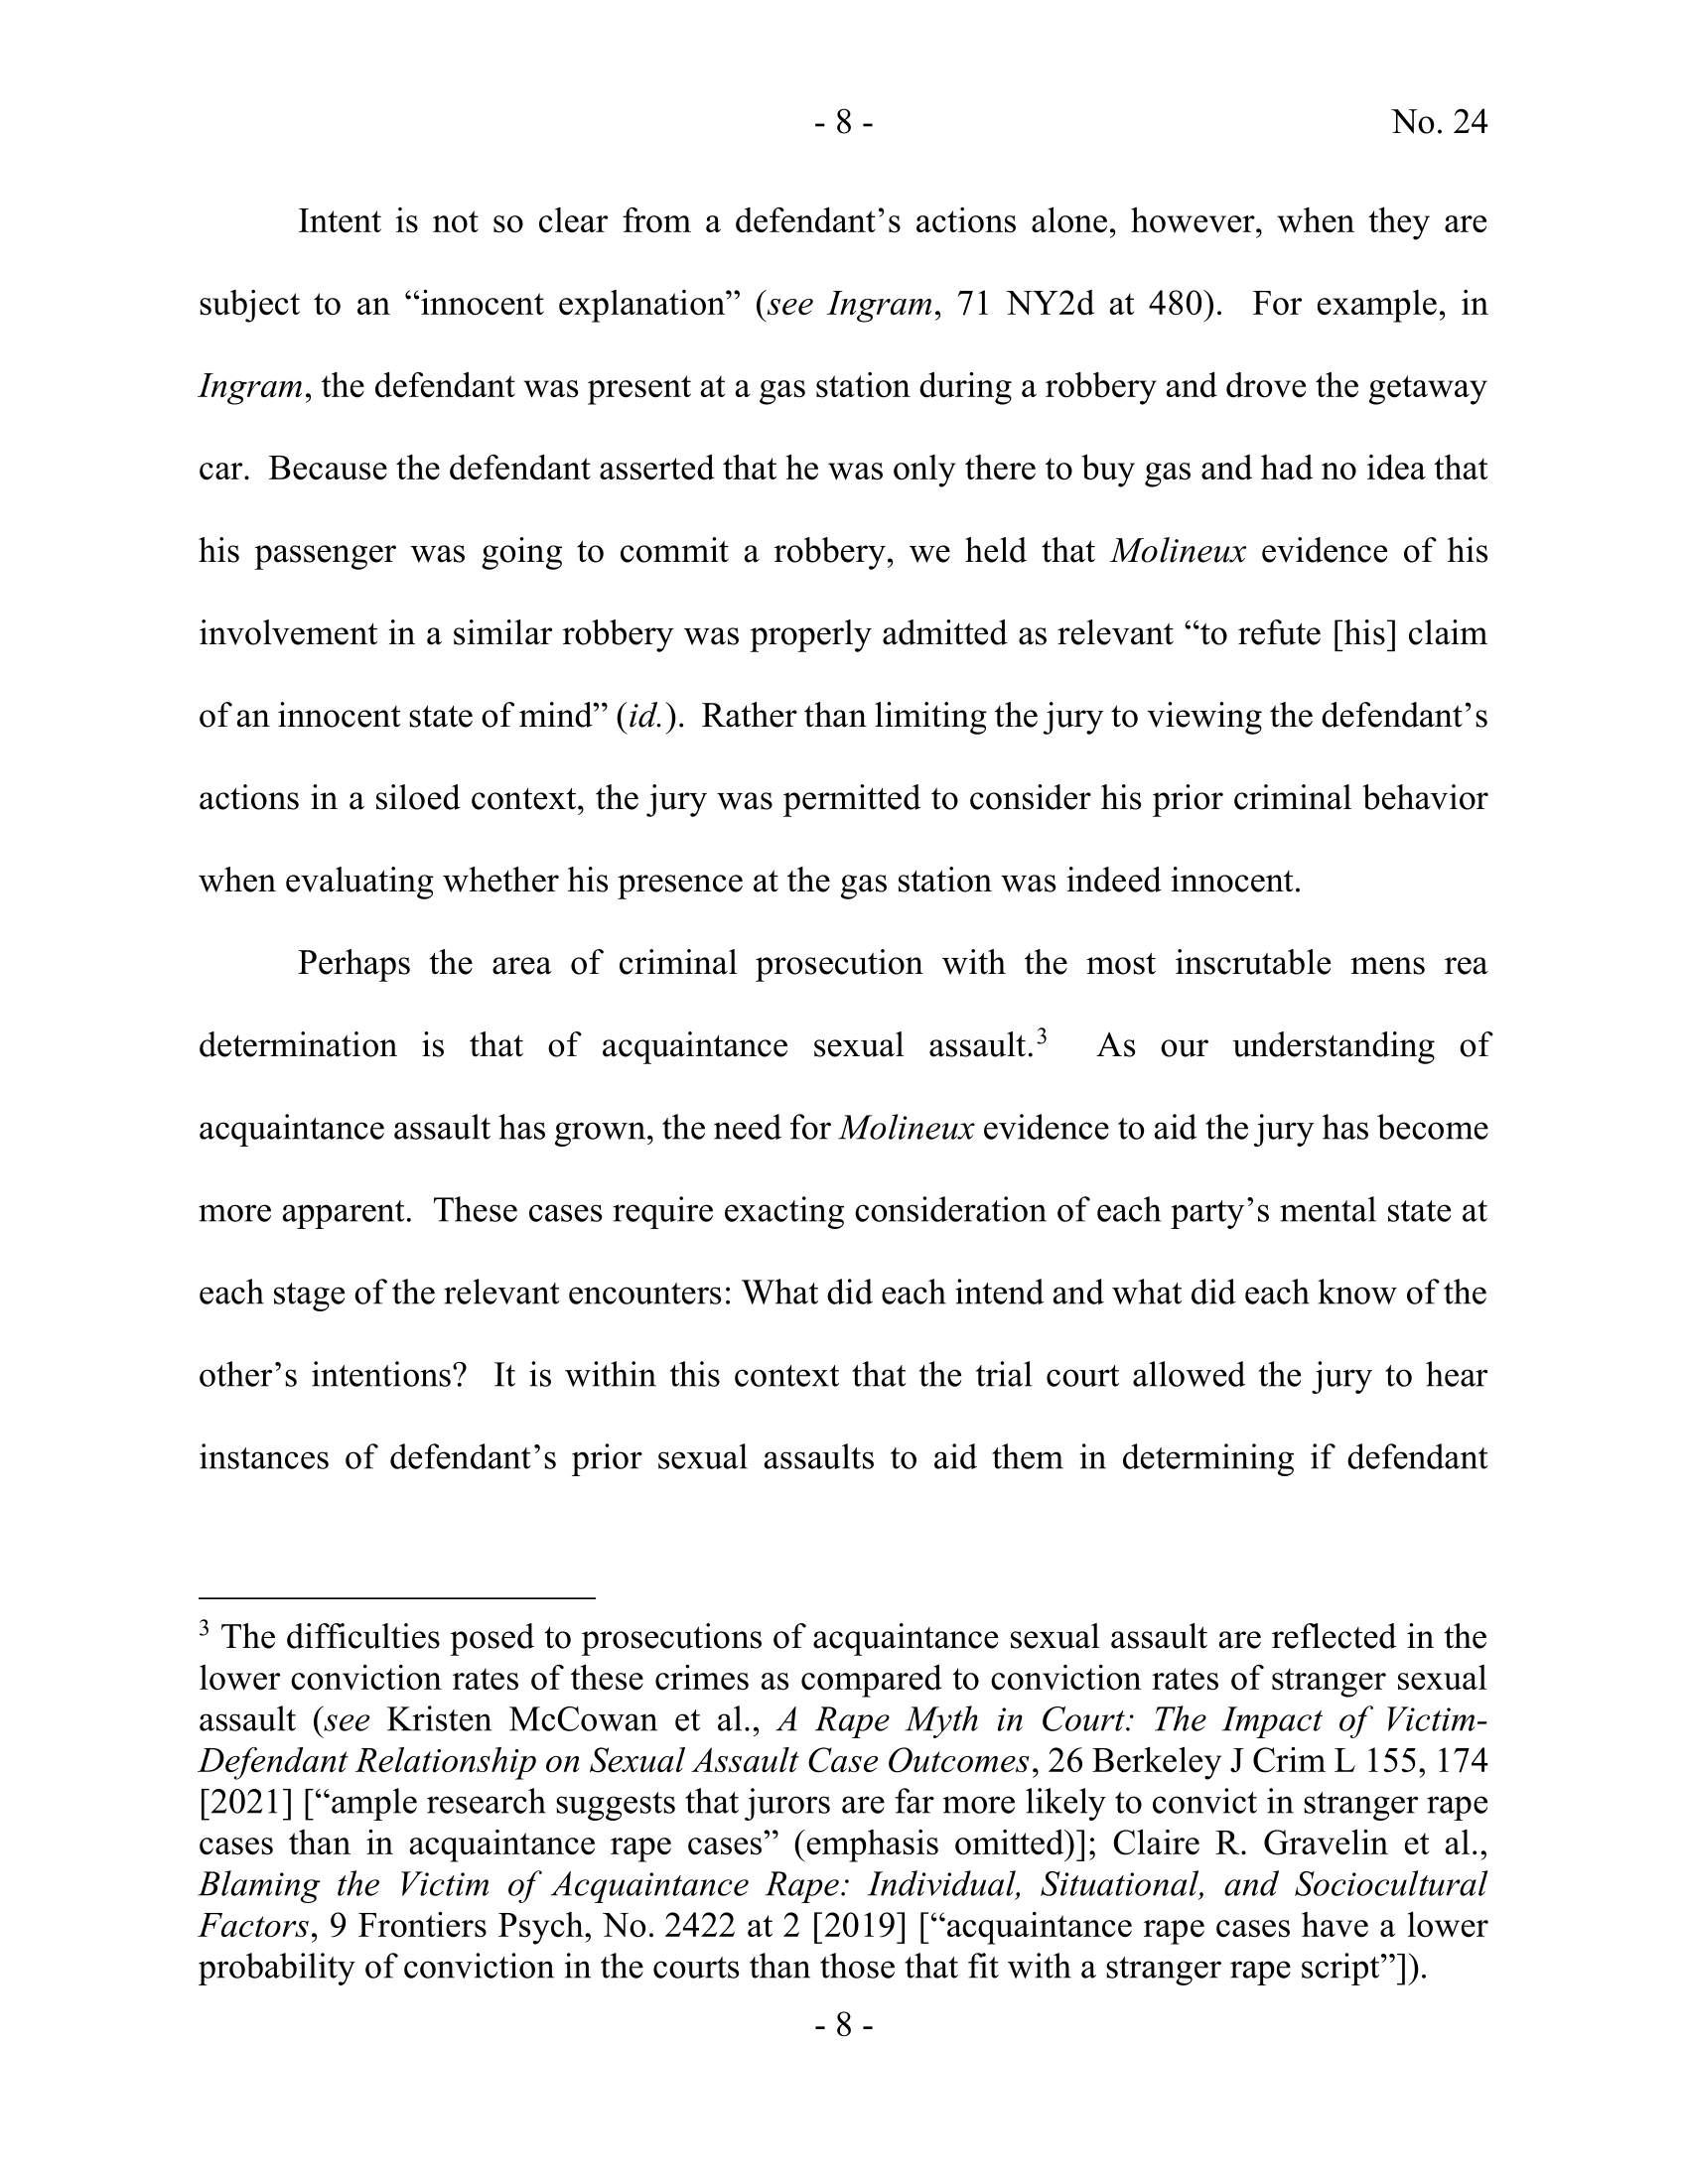 Page 48 of undefined PDF document.